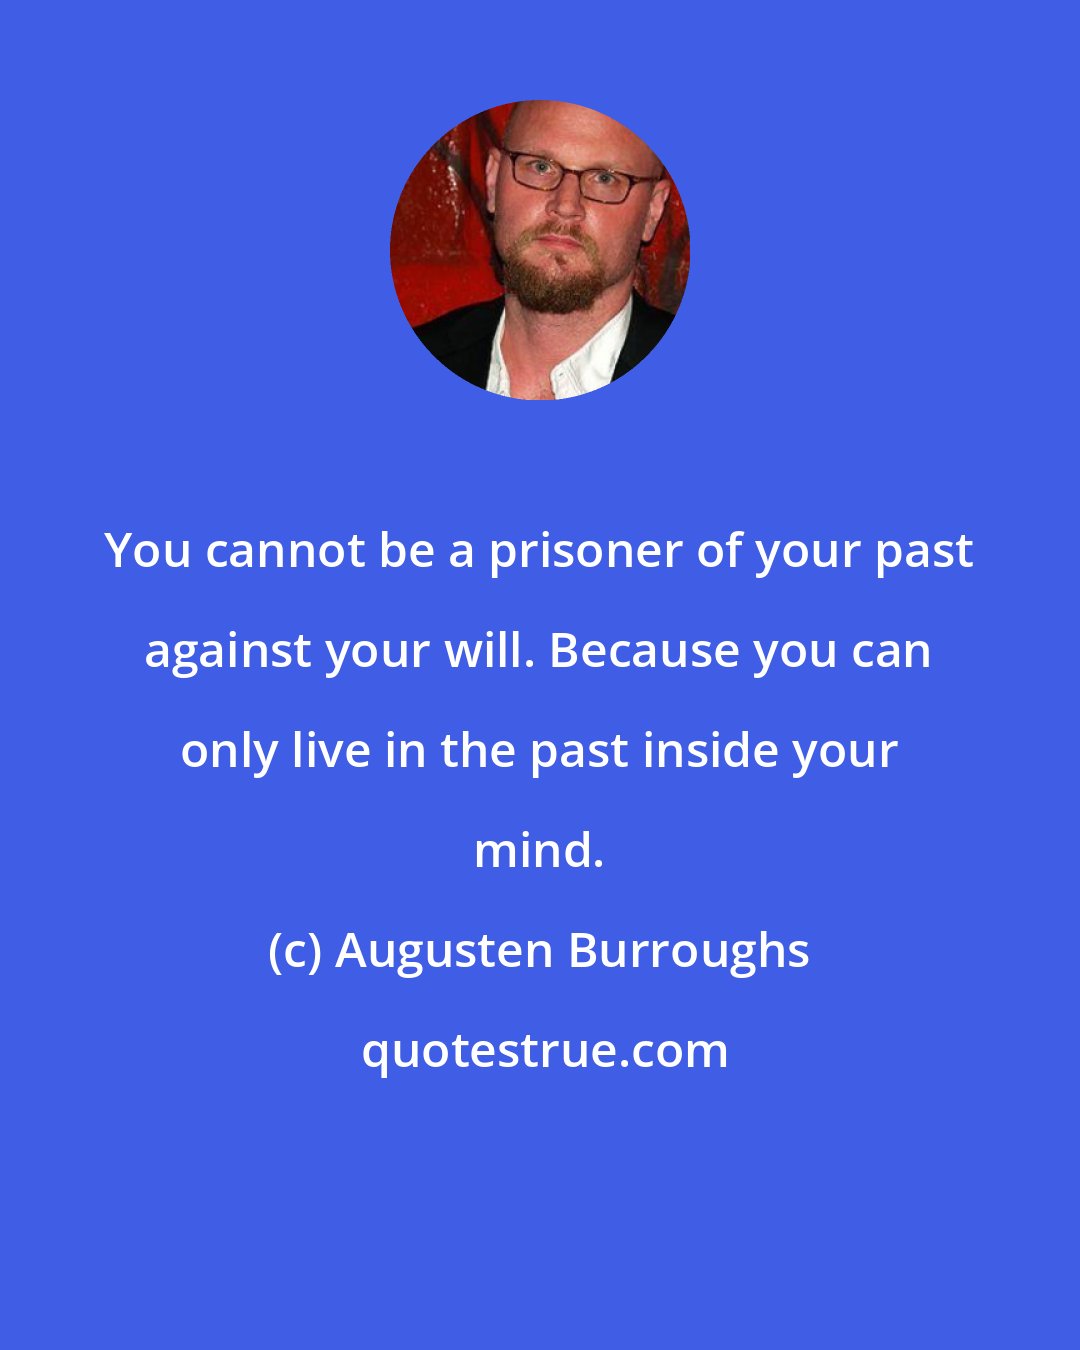 Augusten Burroughs: You cannot be a prisoner of your past against your will. Because you can only live in the past inside your mind.